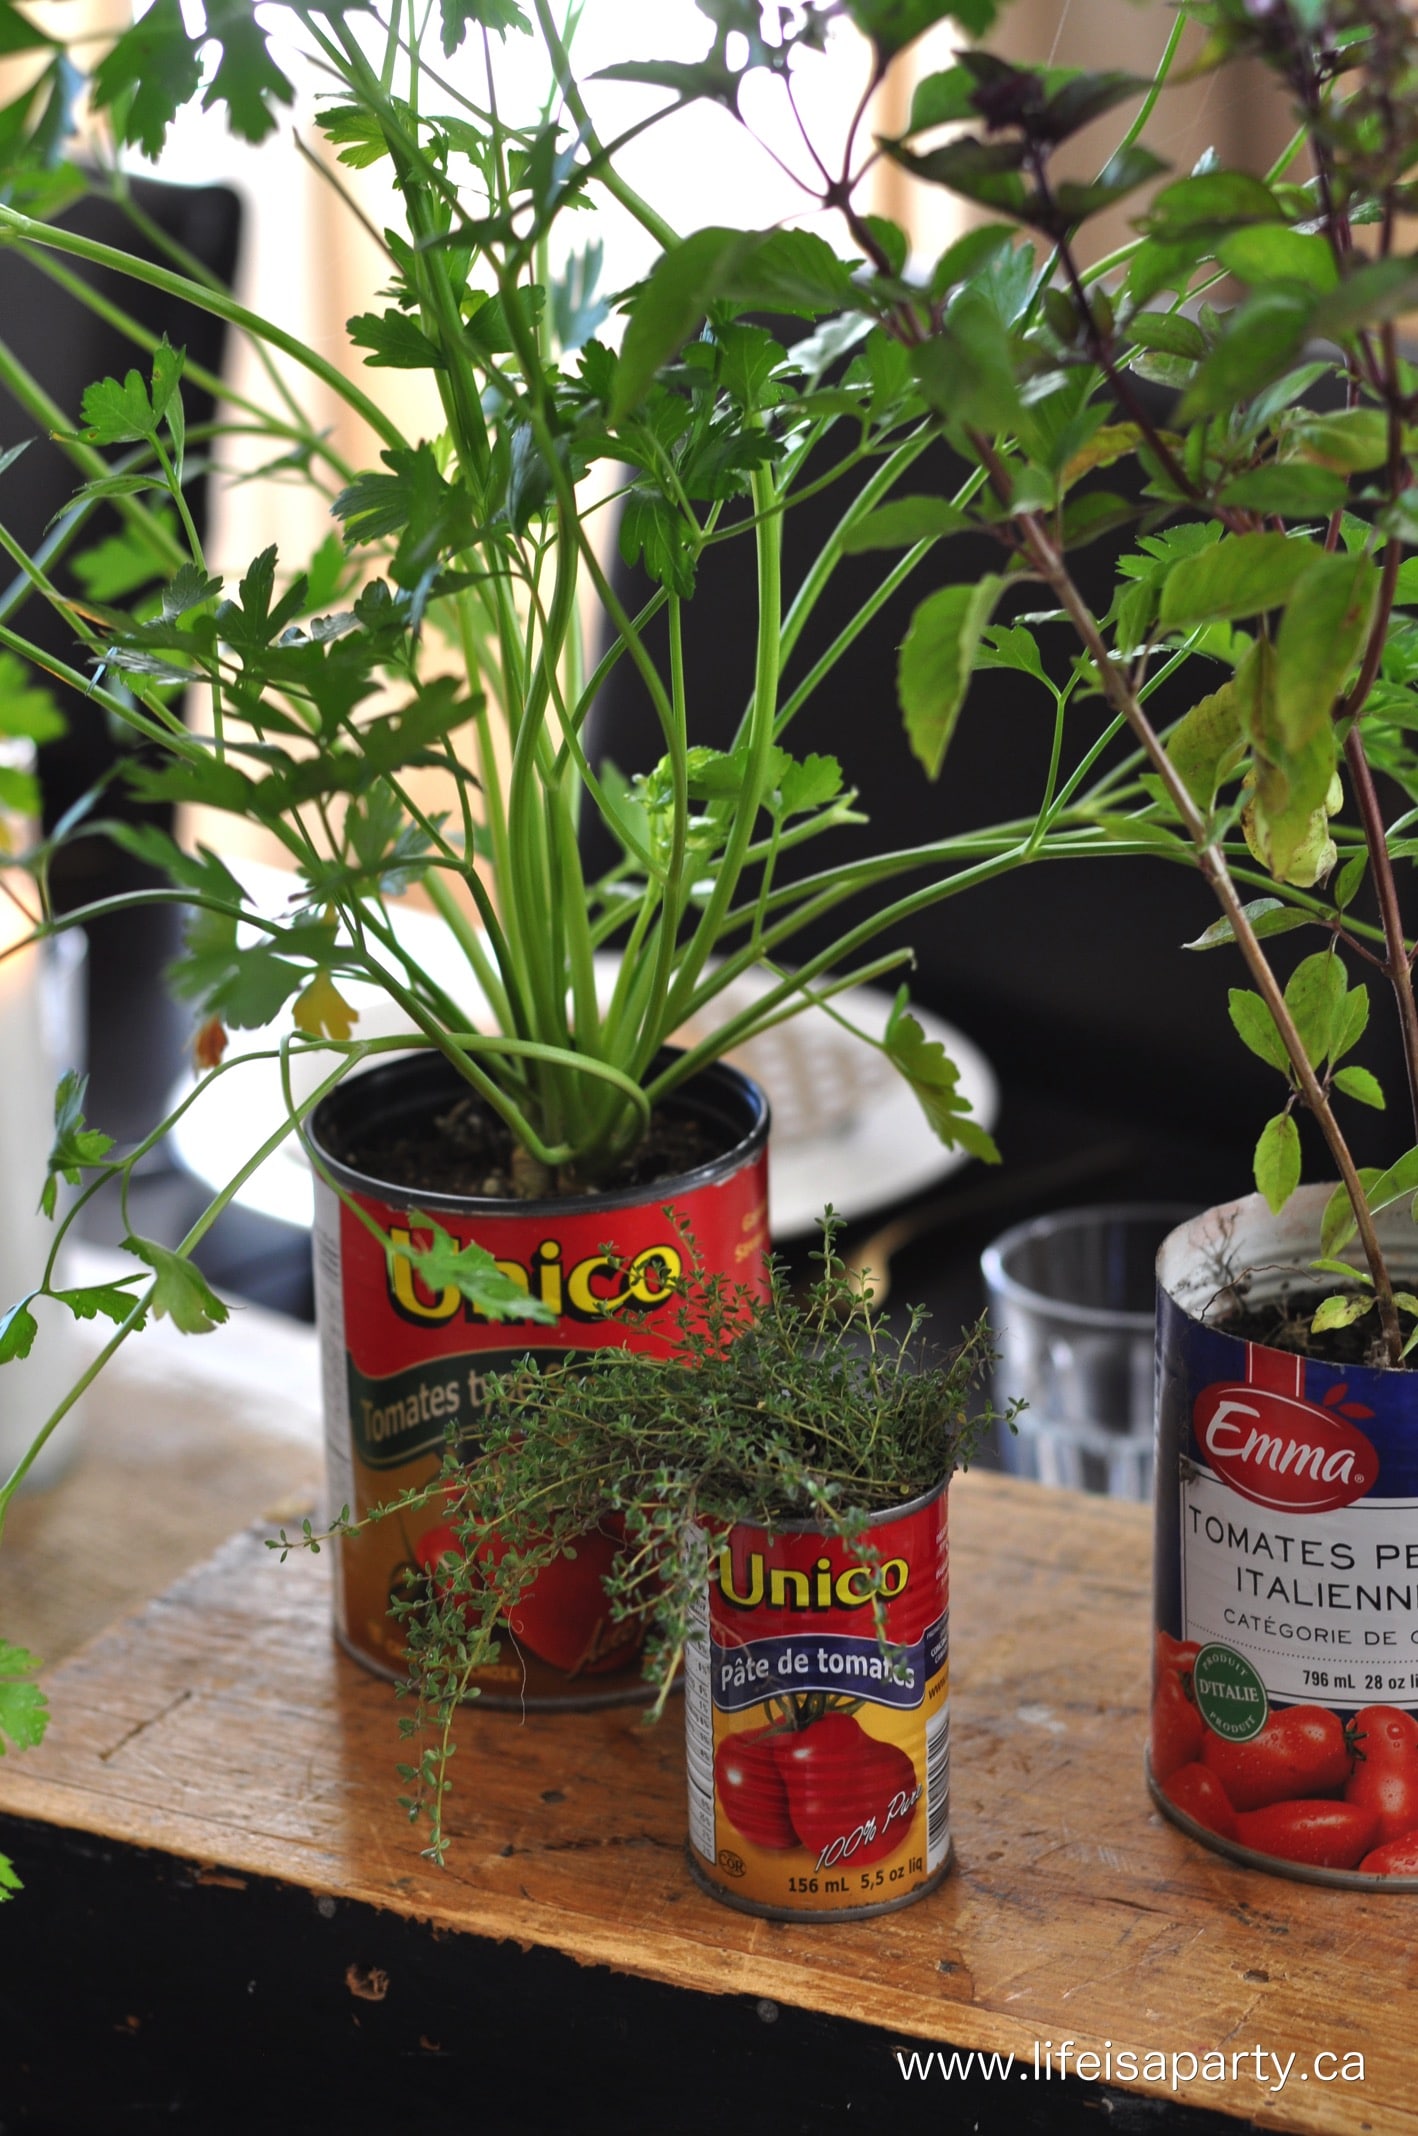 Italian party centre piece of herbs planted in tomato tin cans